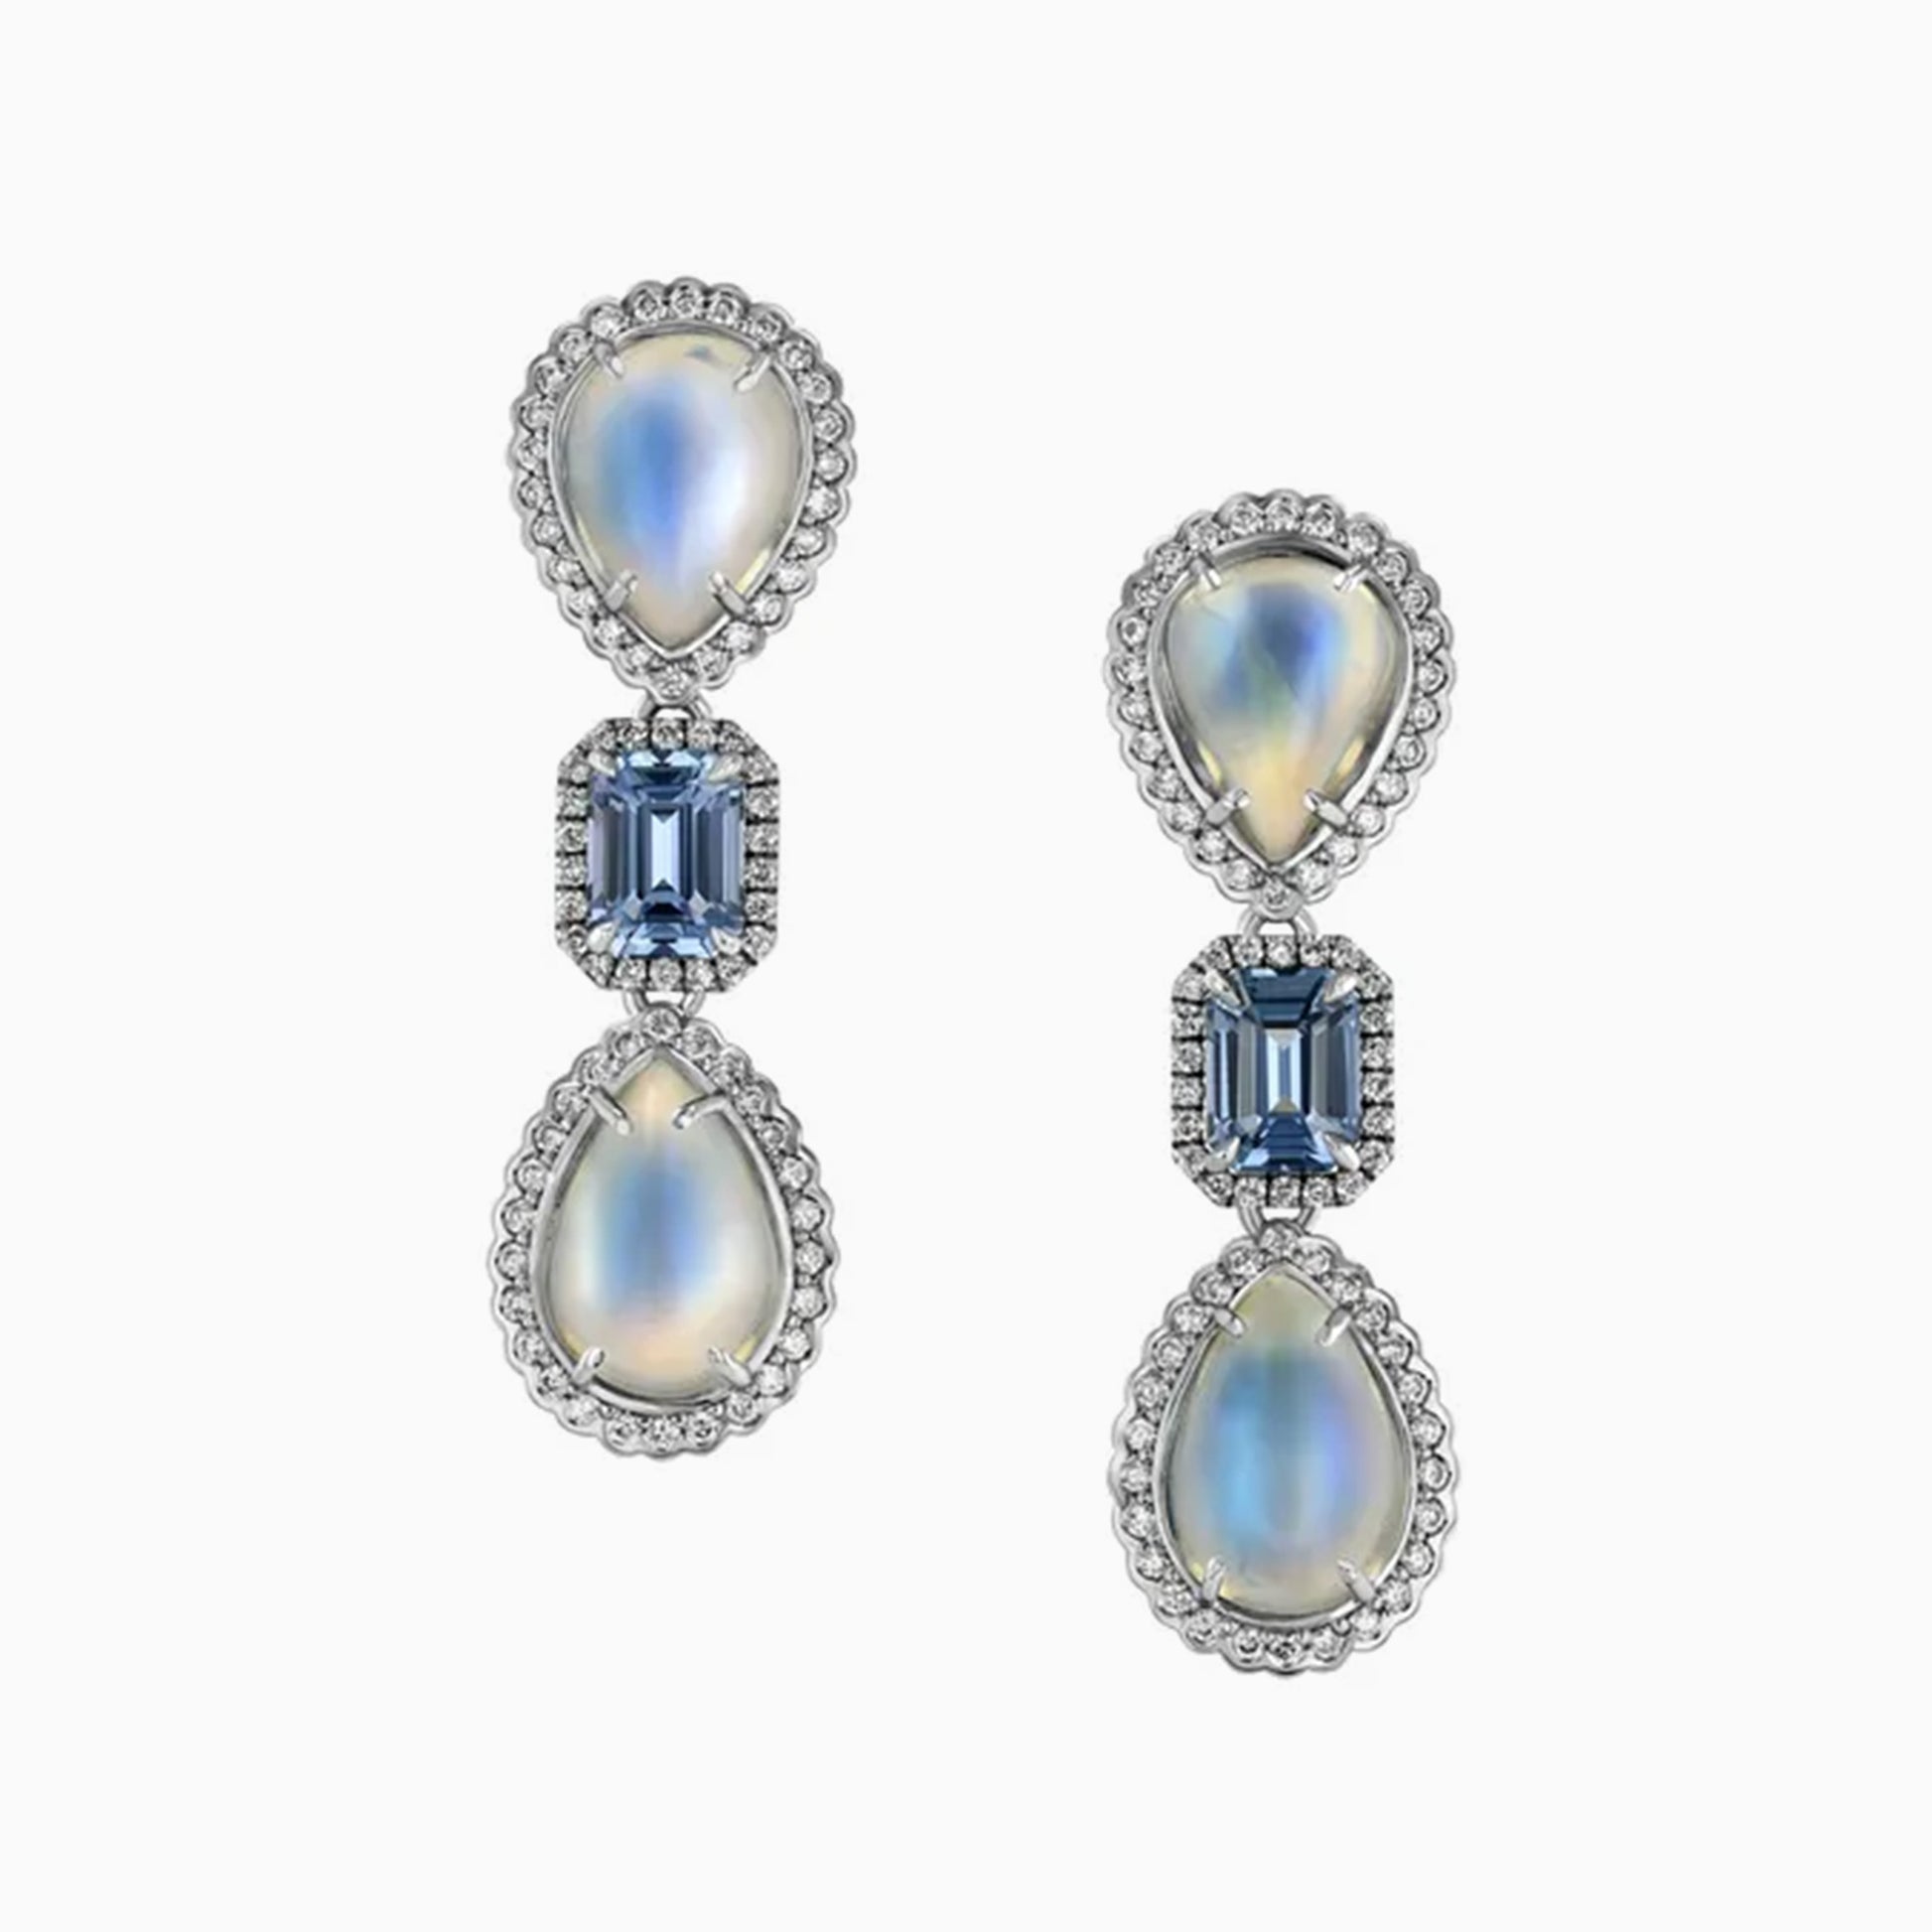 Moonstone and Sapphire Drop Earrings